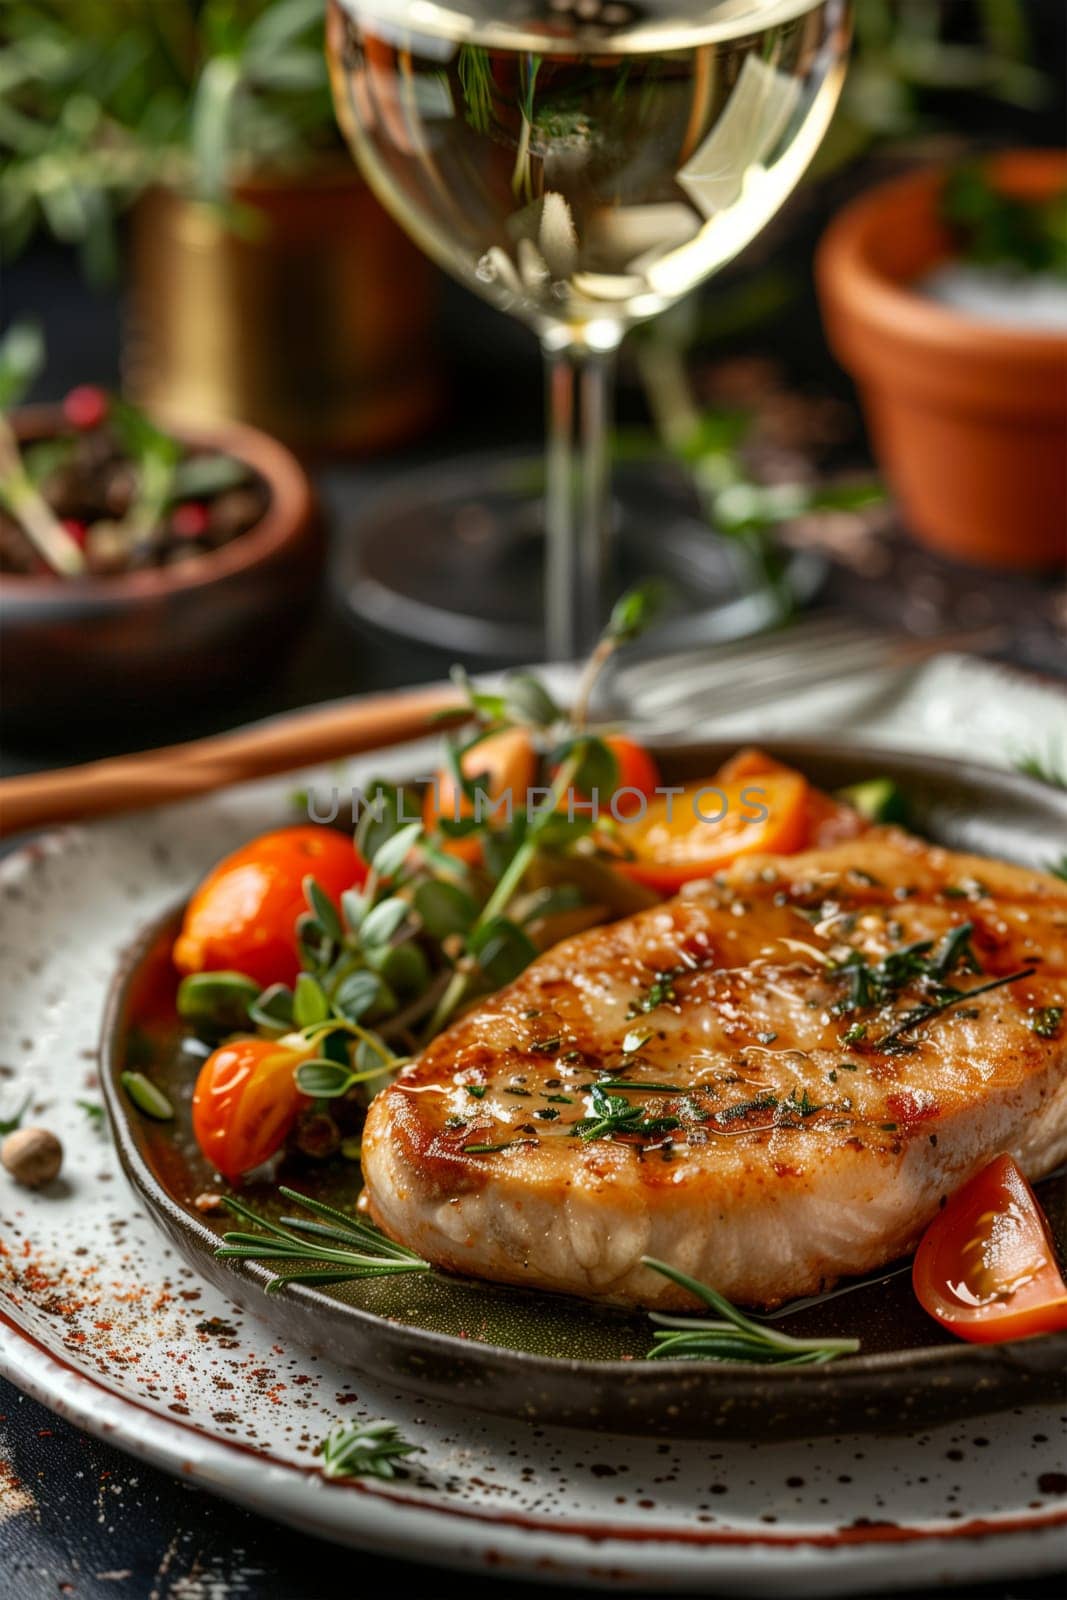 A succulent grilled chicken breast is garnished with fresh herbs and cherry tomatoes, served on a ceramic plate alongside a glass of white wine.